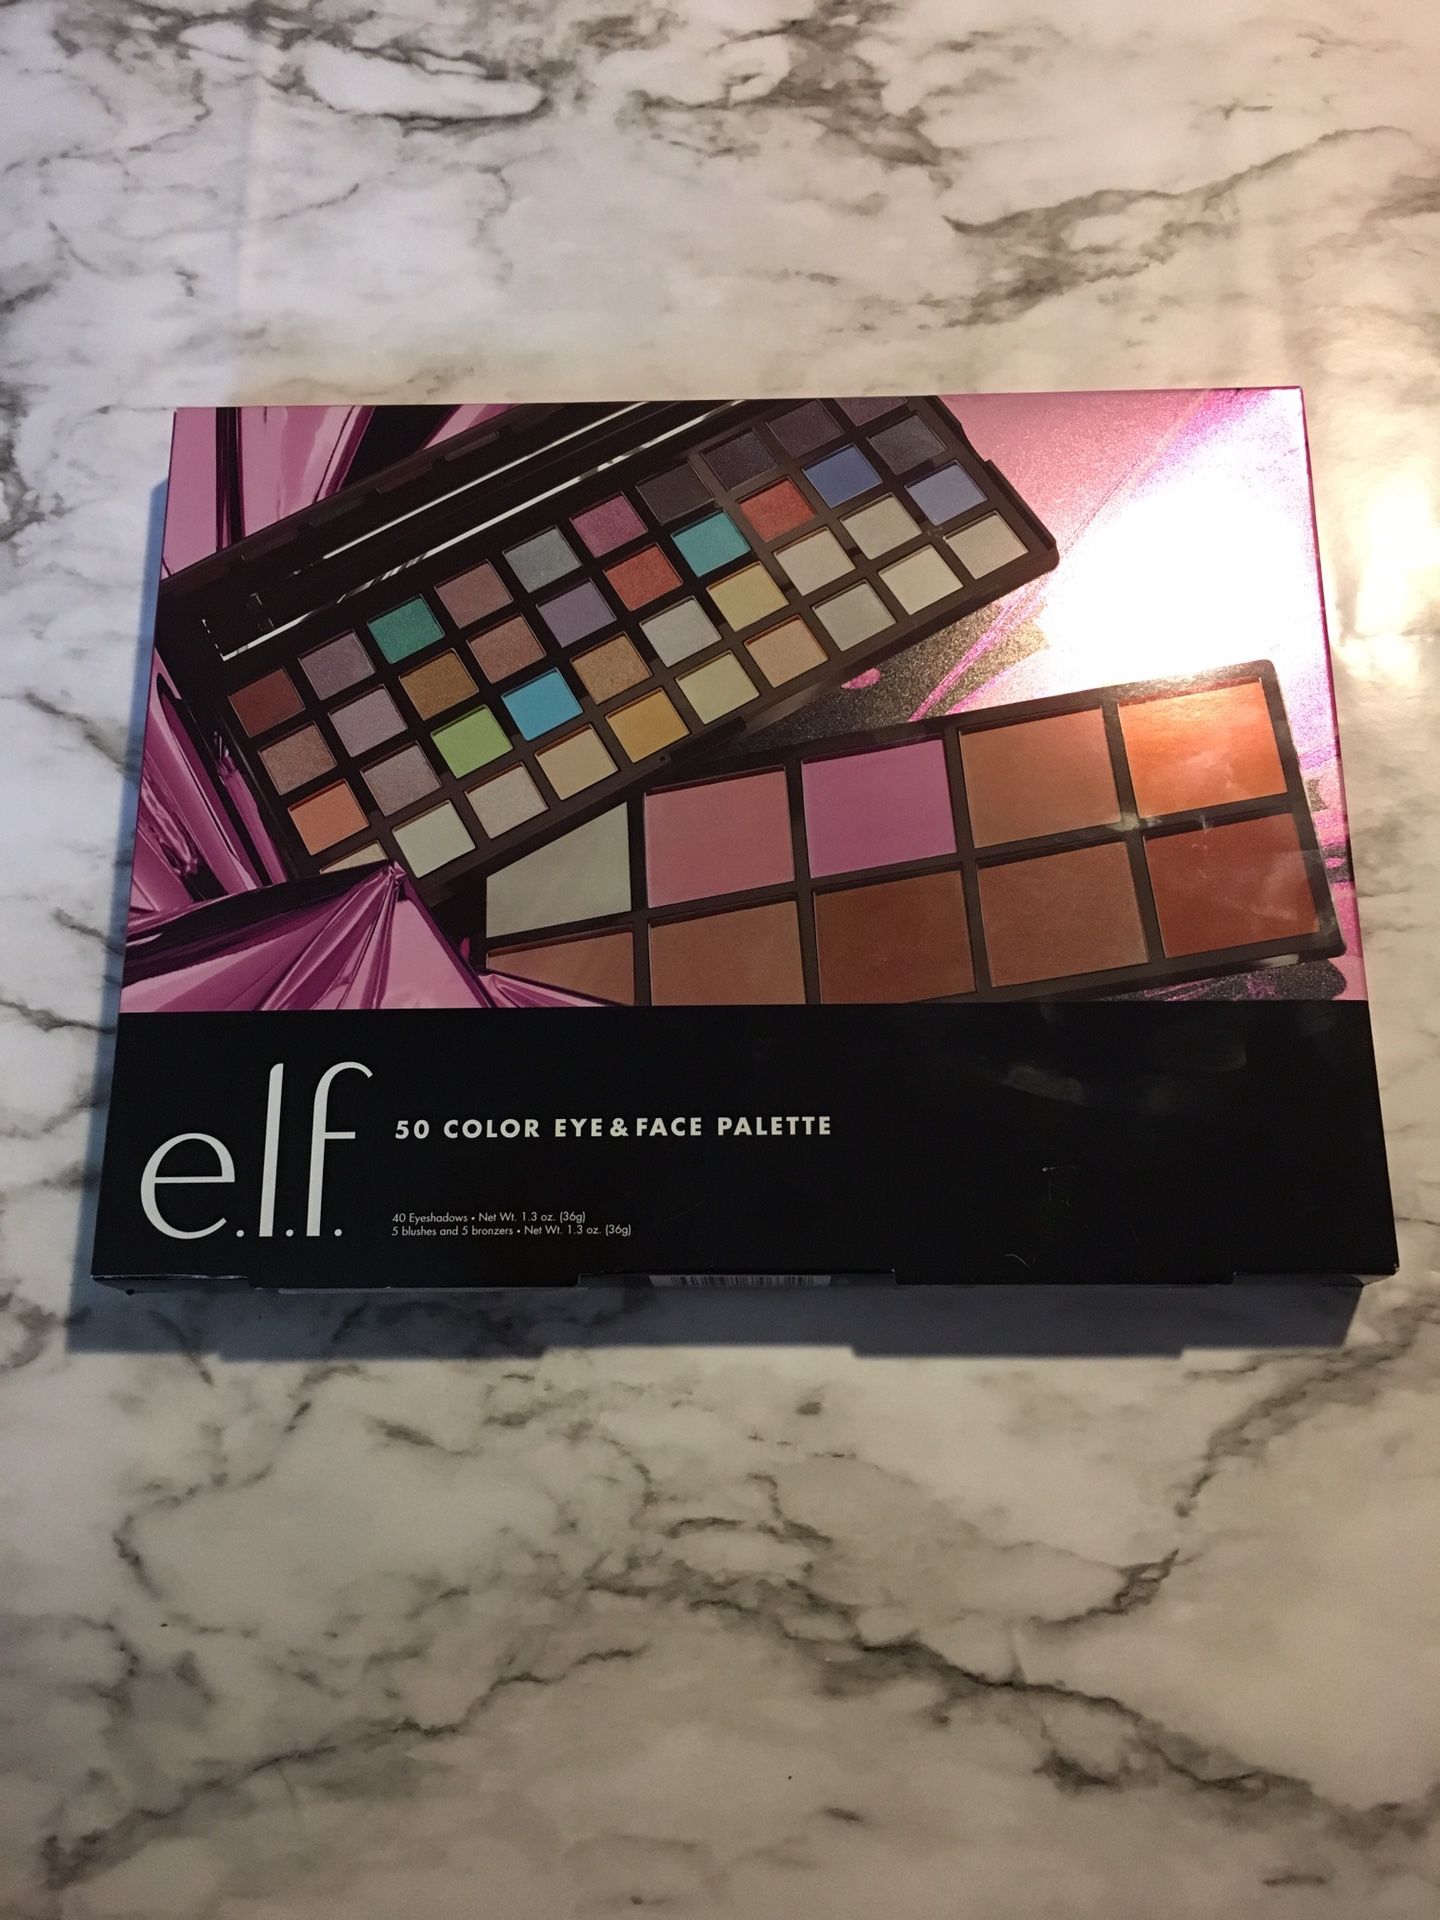 50 color eye and face palette